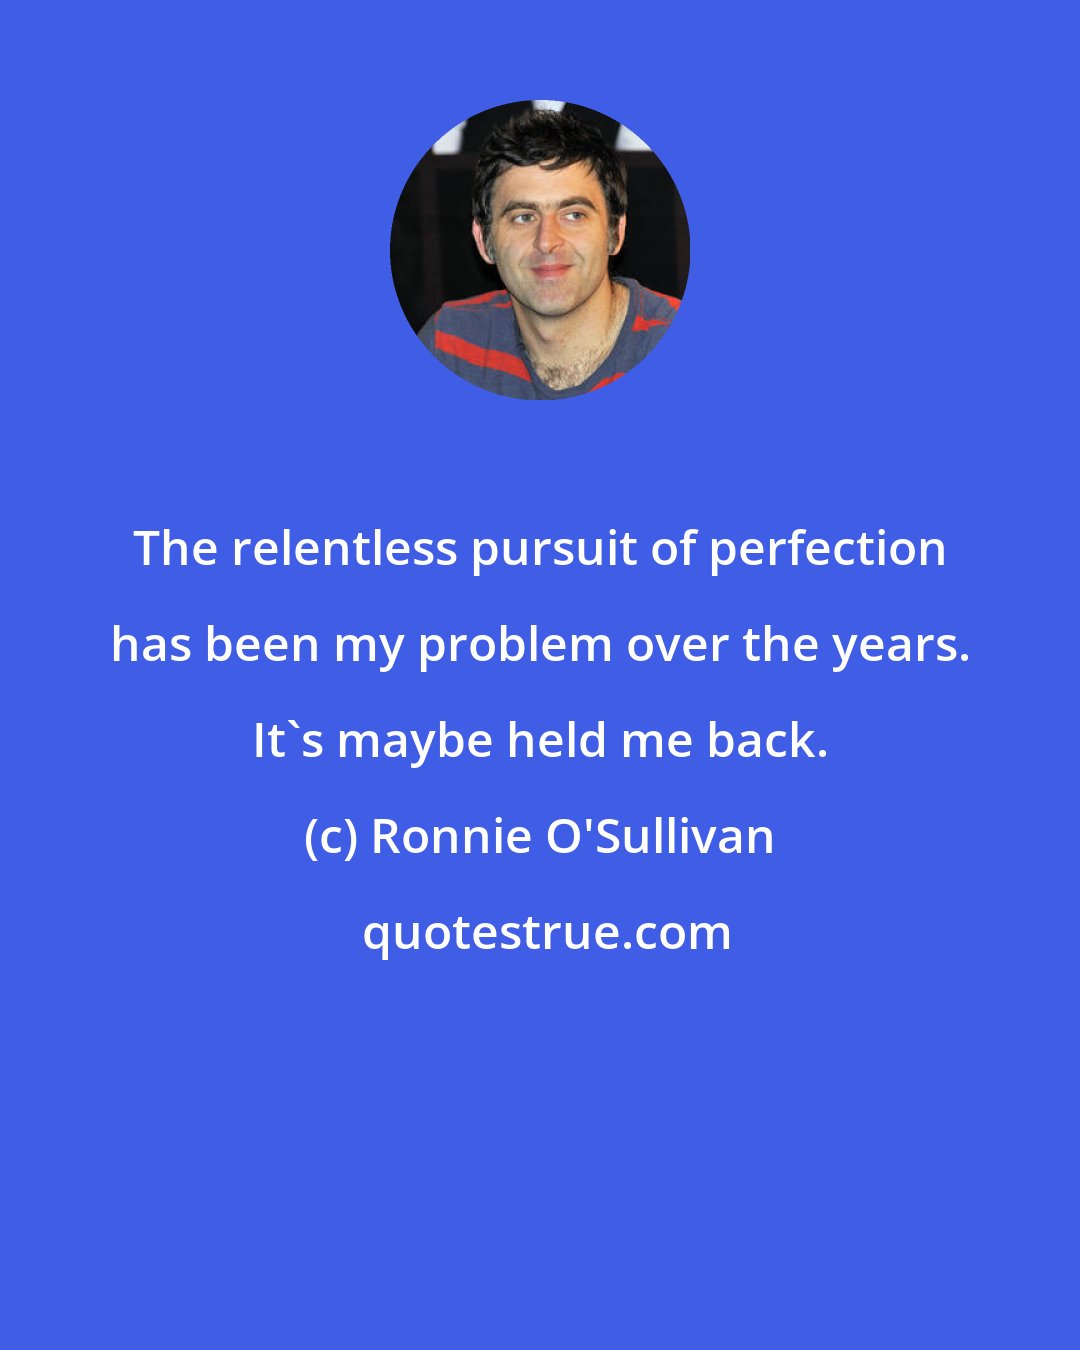 Ronnie O'Sullivan: The relentless pursuit of perfection has been my problem over the years. It's maybe held me back.